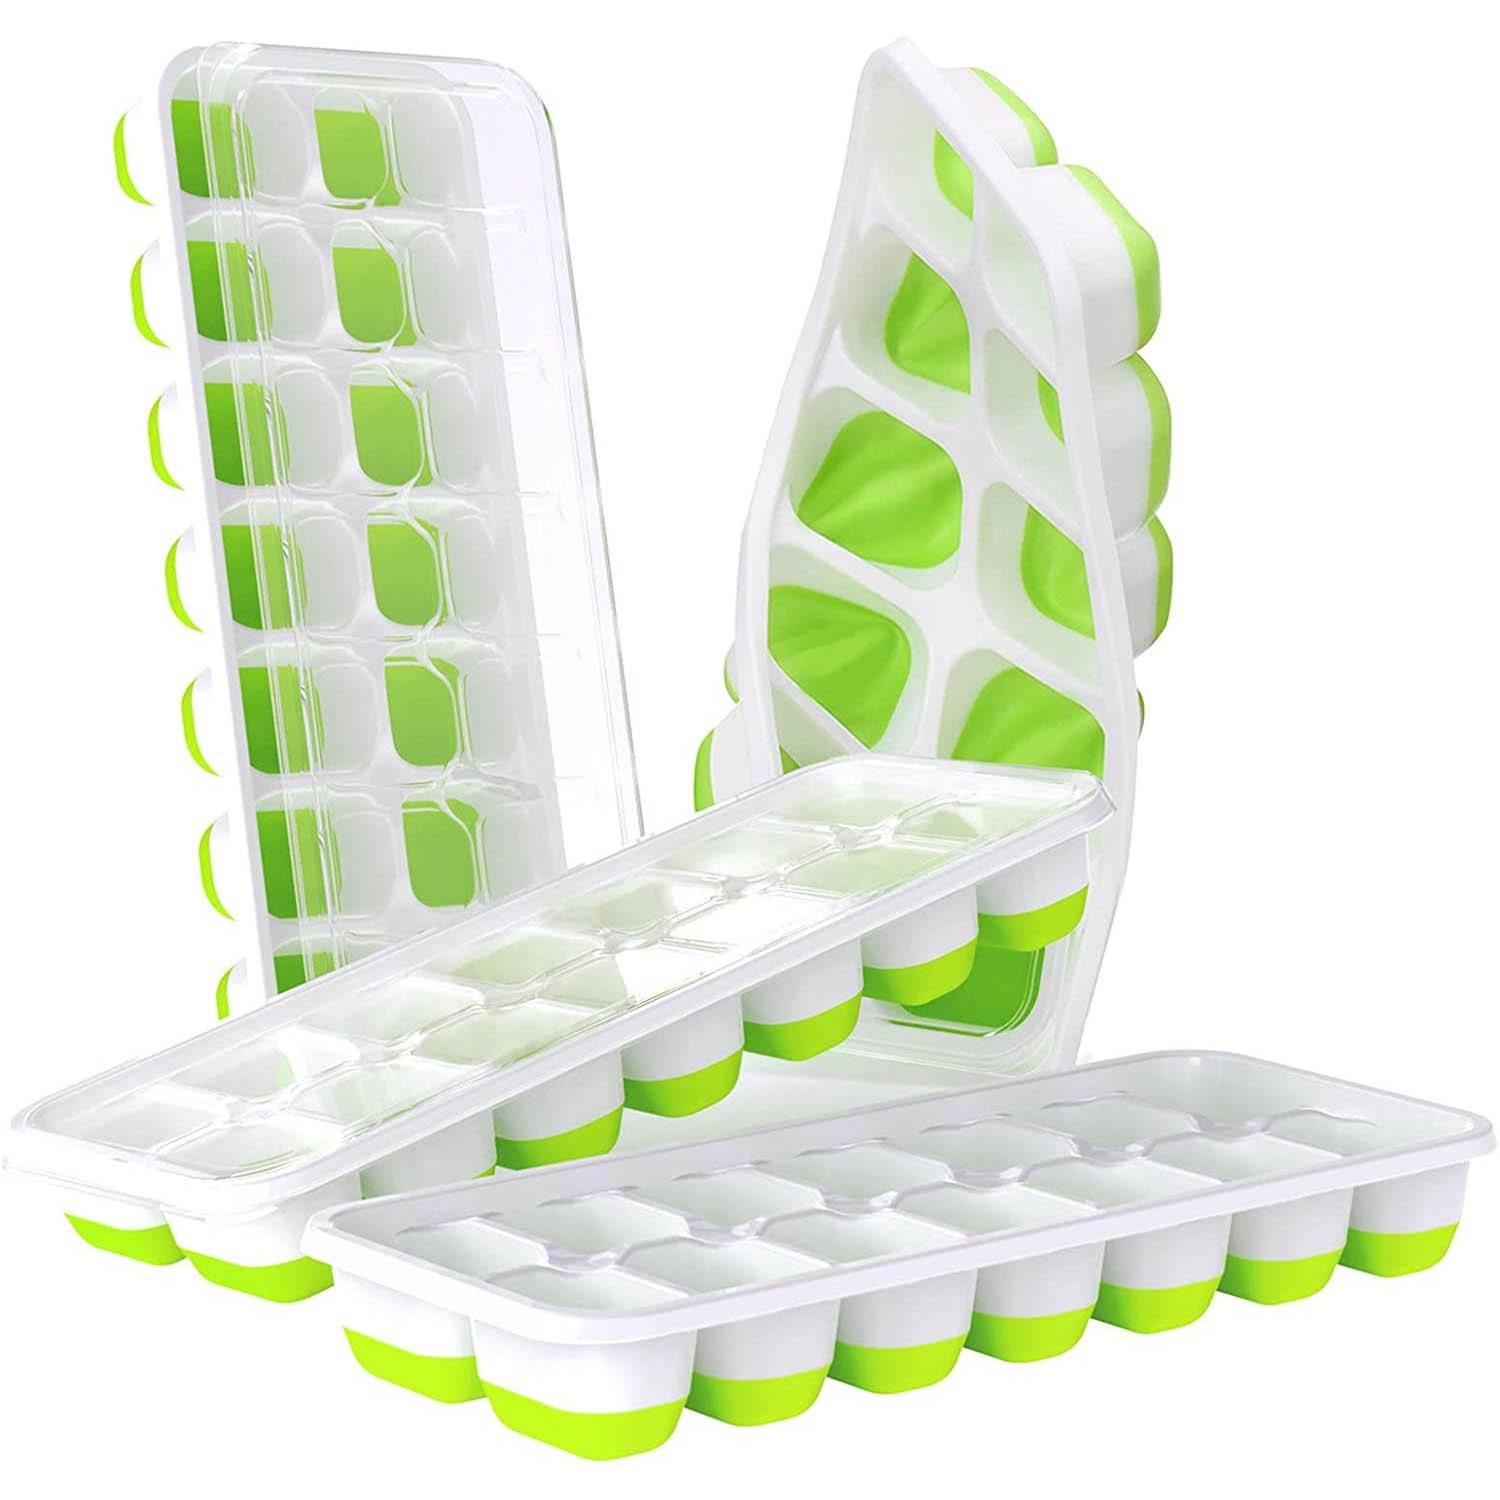 lce Cube Trays Silicone Ice Cube Tray with Removable Lid Easy